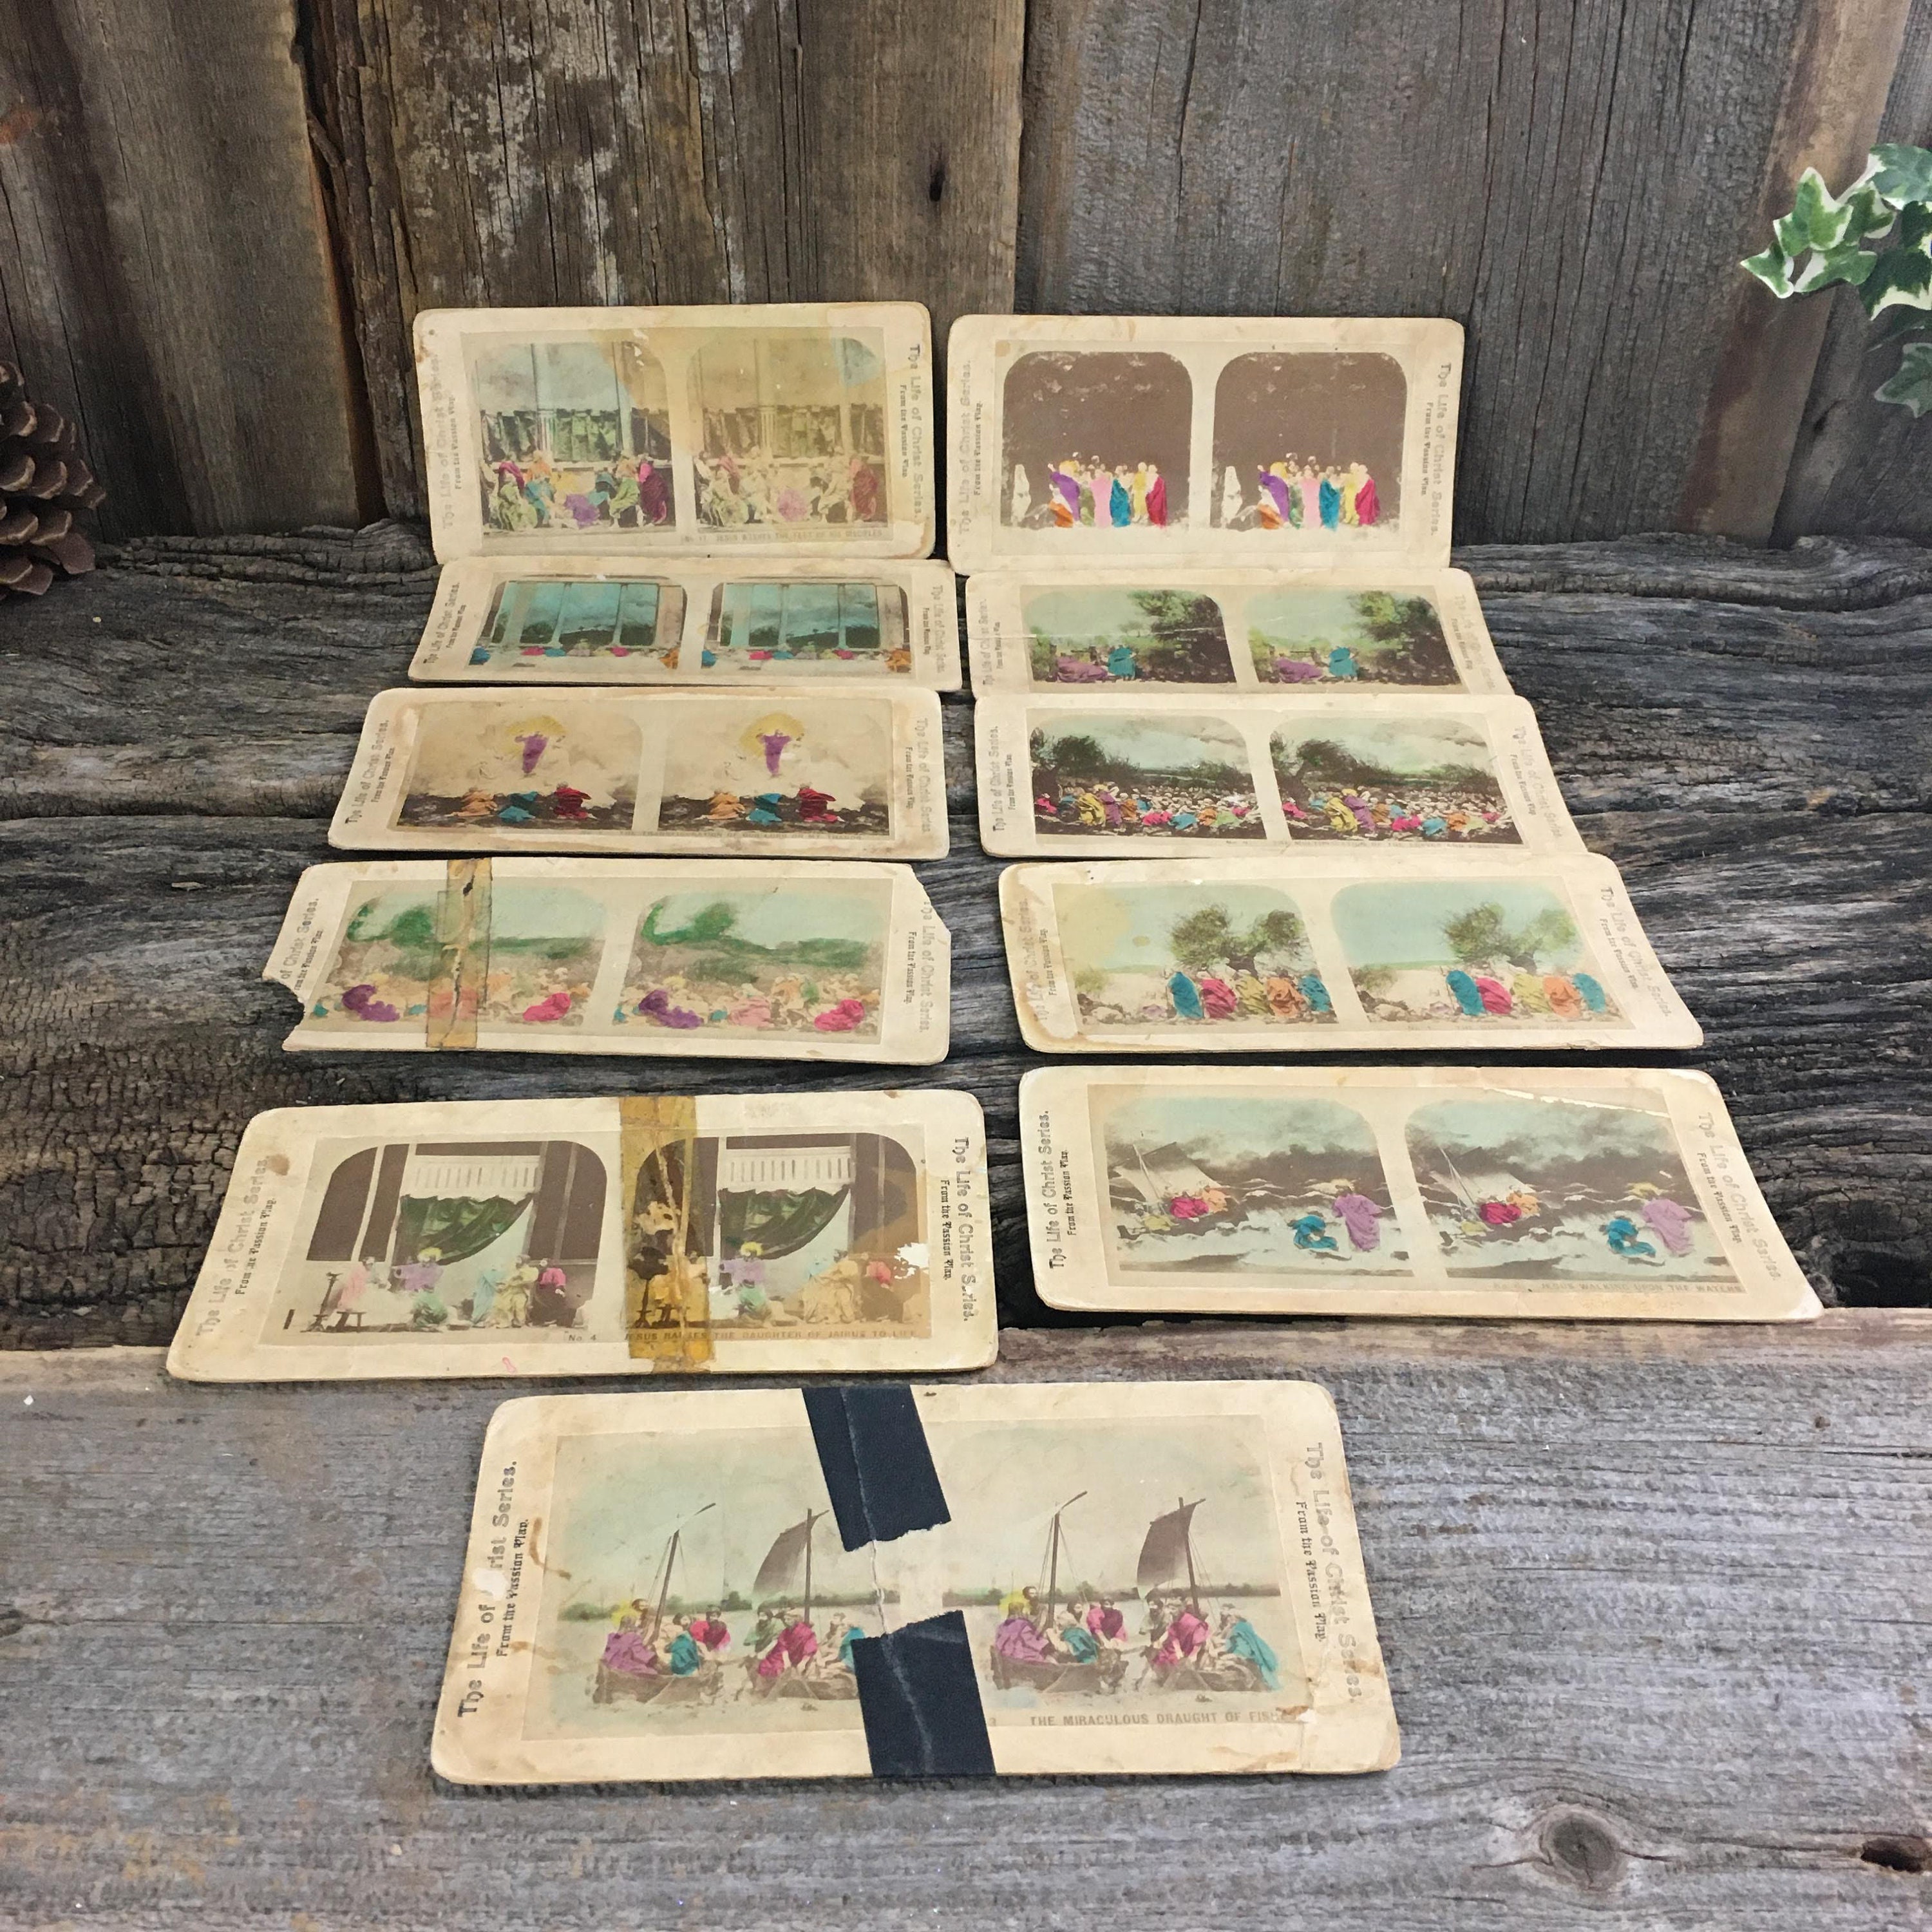 Lot of antique stereoscope cards,Life of Christ stereoscope cards,Passion Play stereoscope cards ...